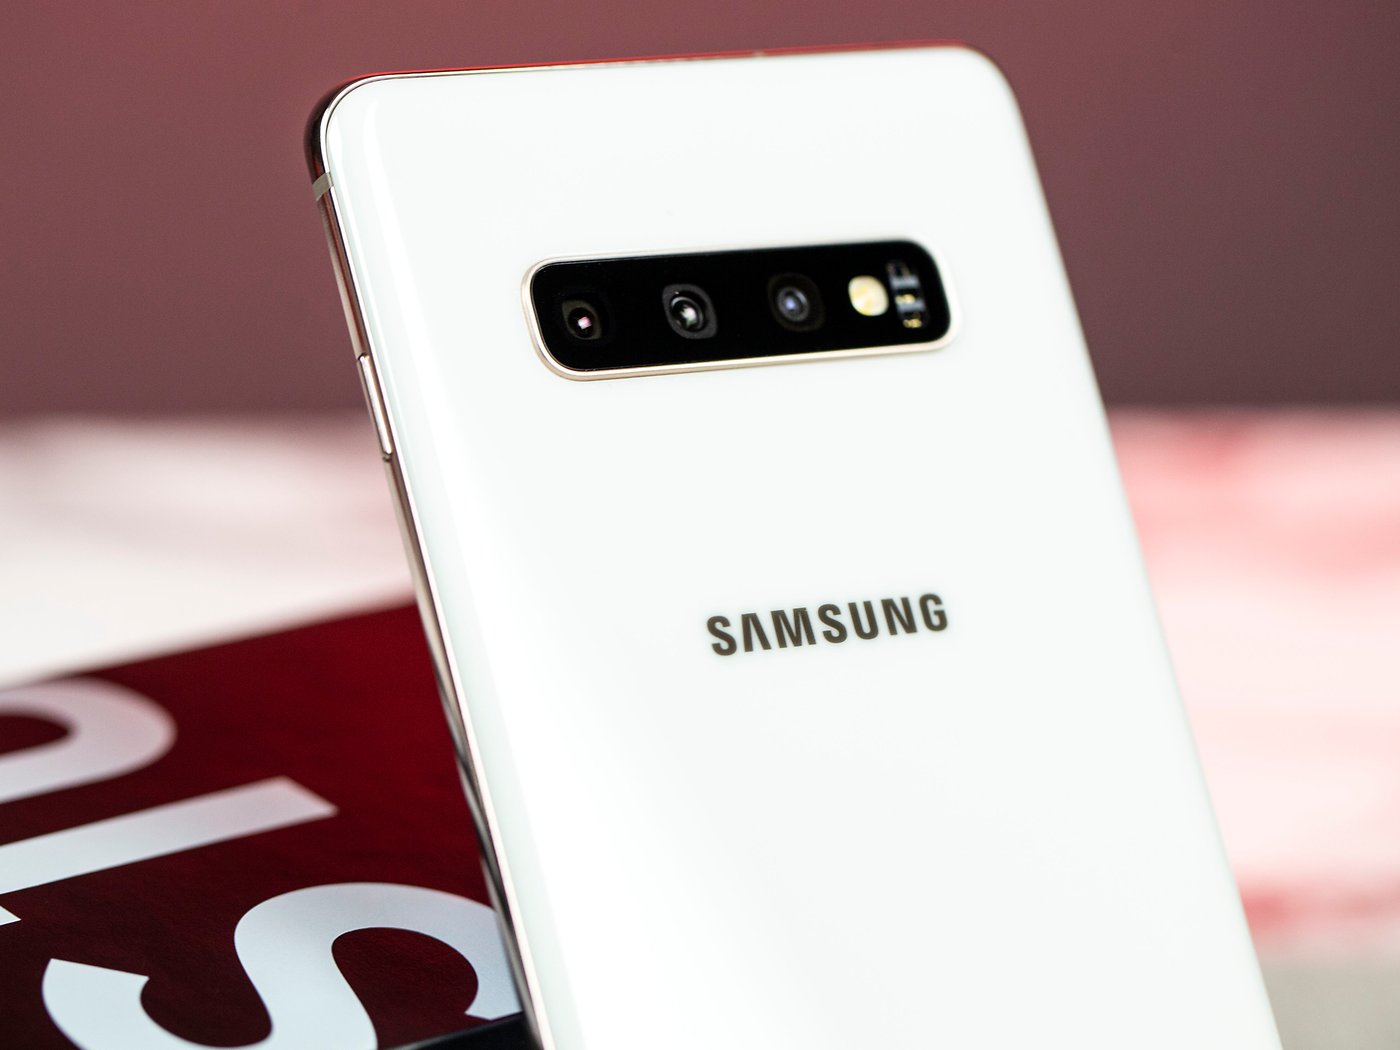 Samsung Galaxy S10+ review: a flagship with (few) compromises